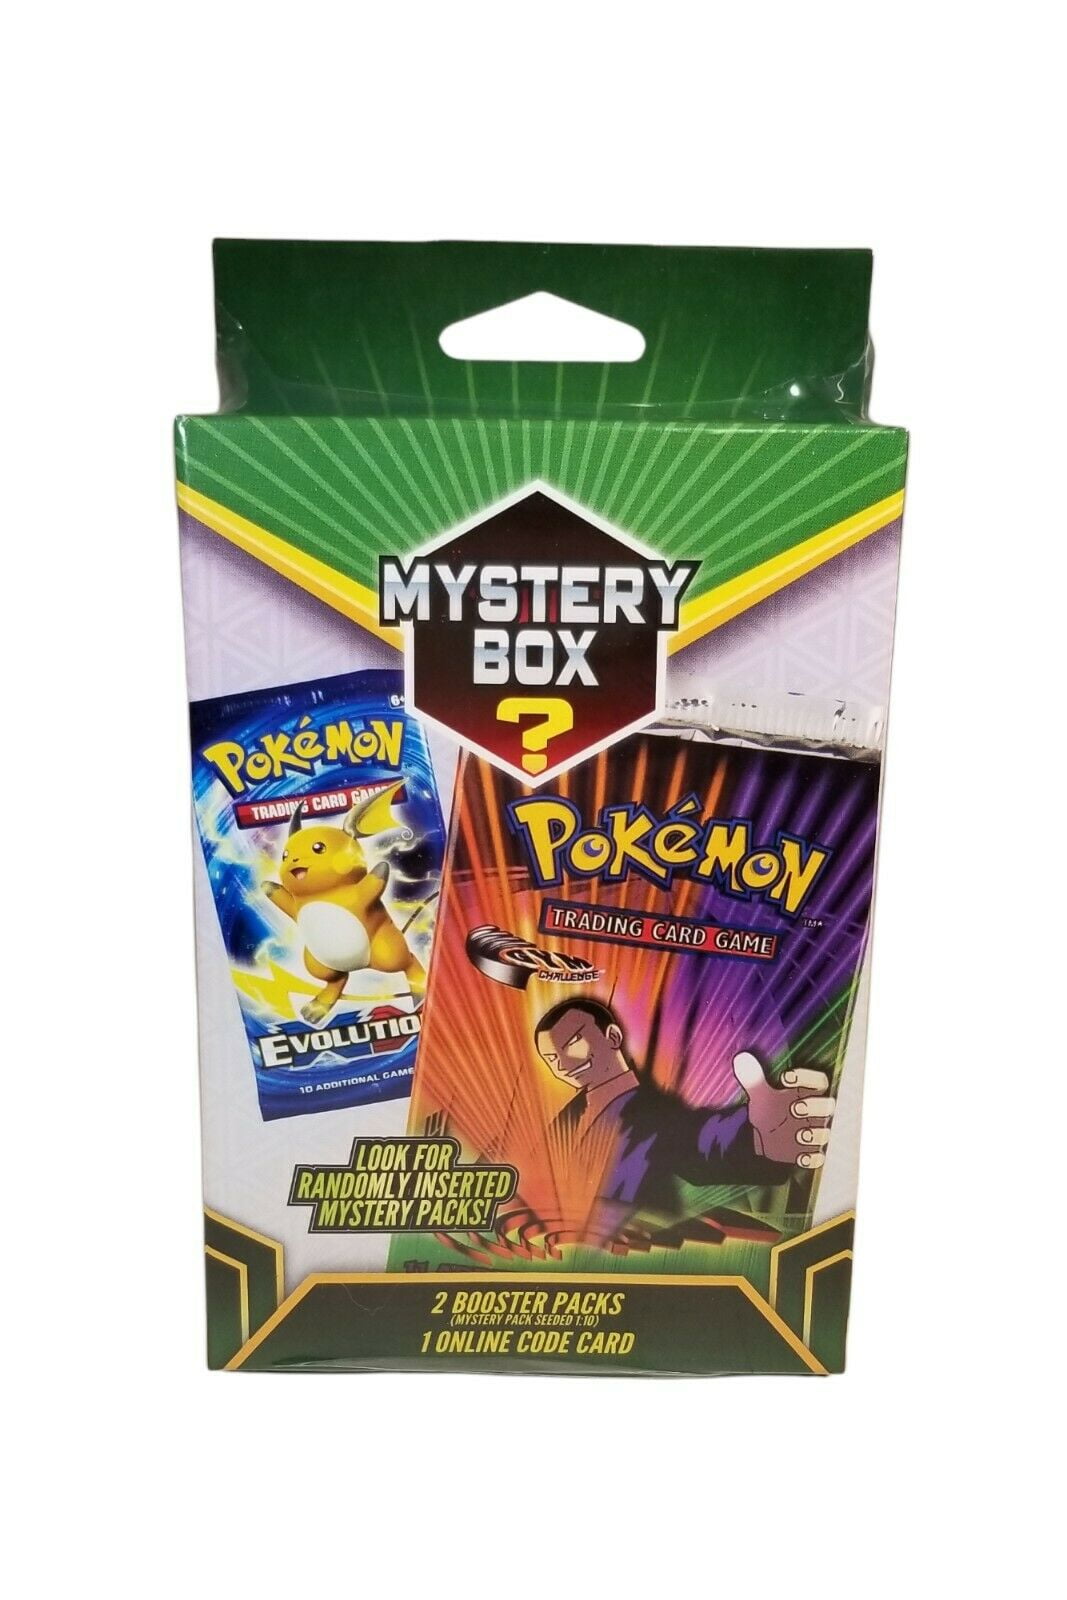 2020 pokemon Sealed 15 card mystery pack walgreens Lot of 2 COOL CHRISTMAS GIFT 